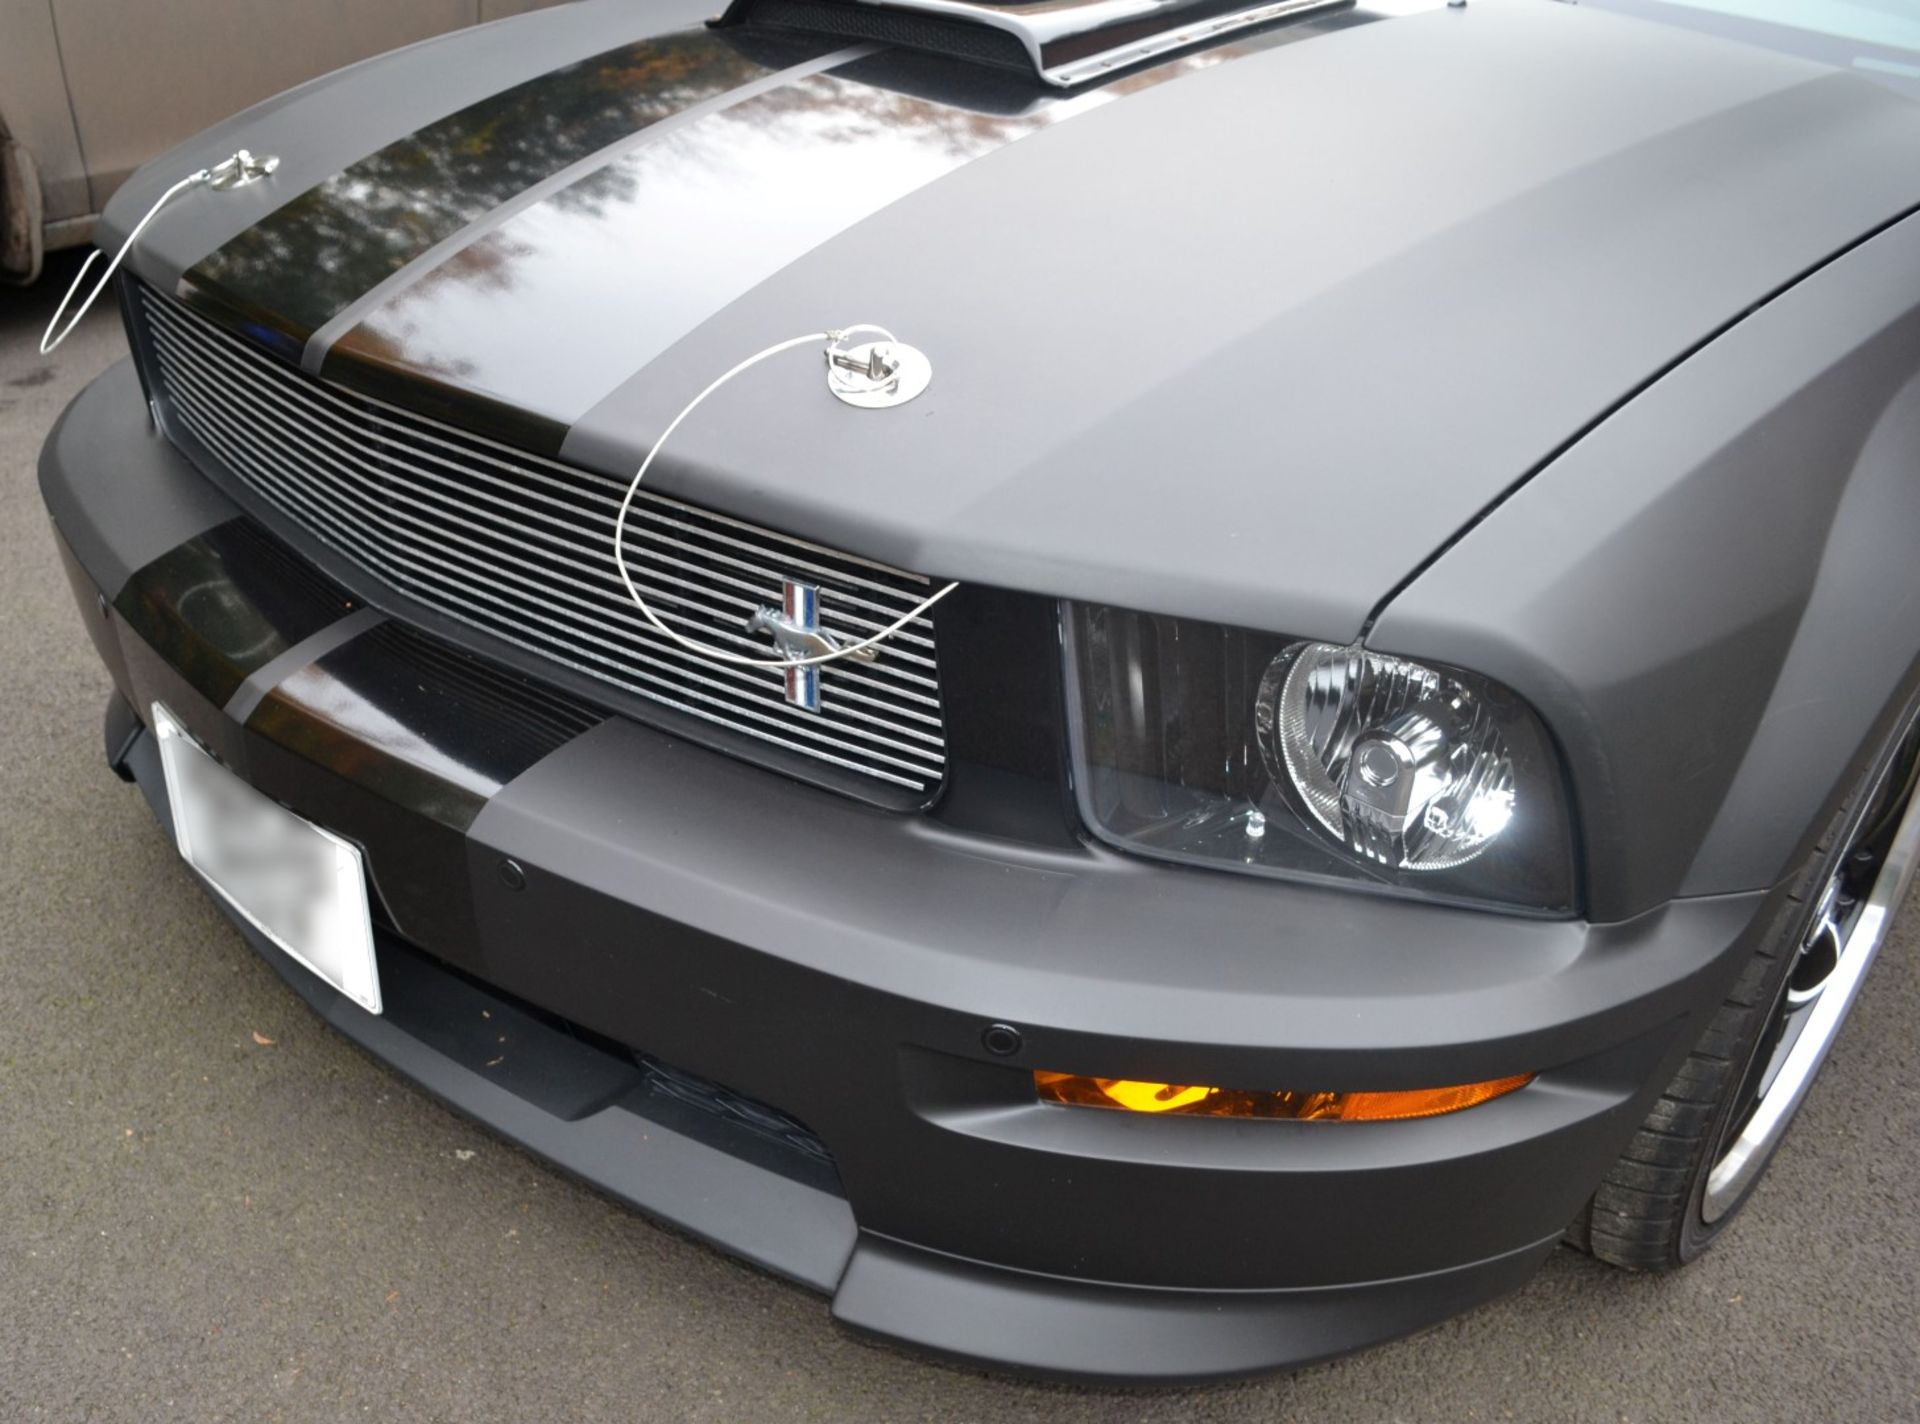 Limited Edition Supercharged 2008 Shelby Ford Mustang GT-C - 2136 Miles - No VAT on the hammer - Image 16 of 64